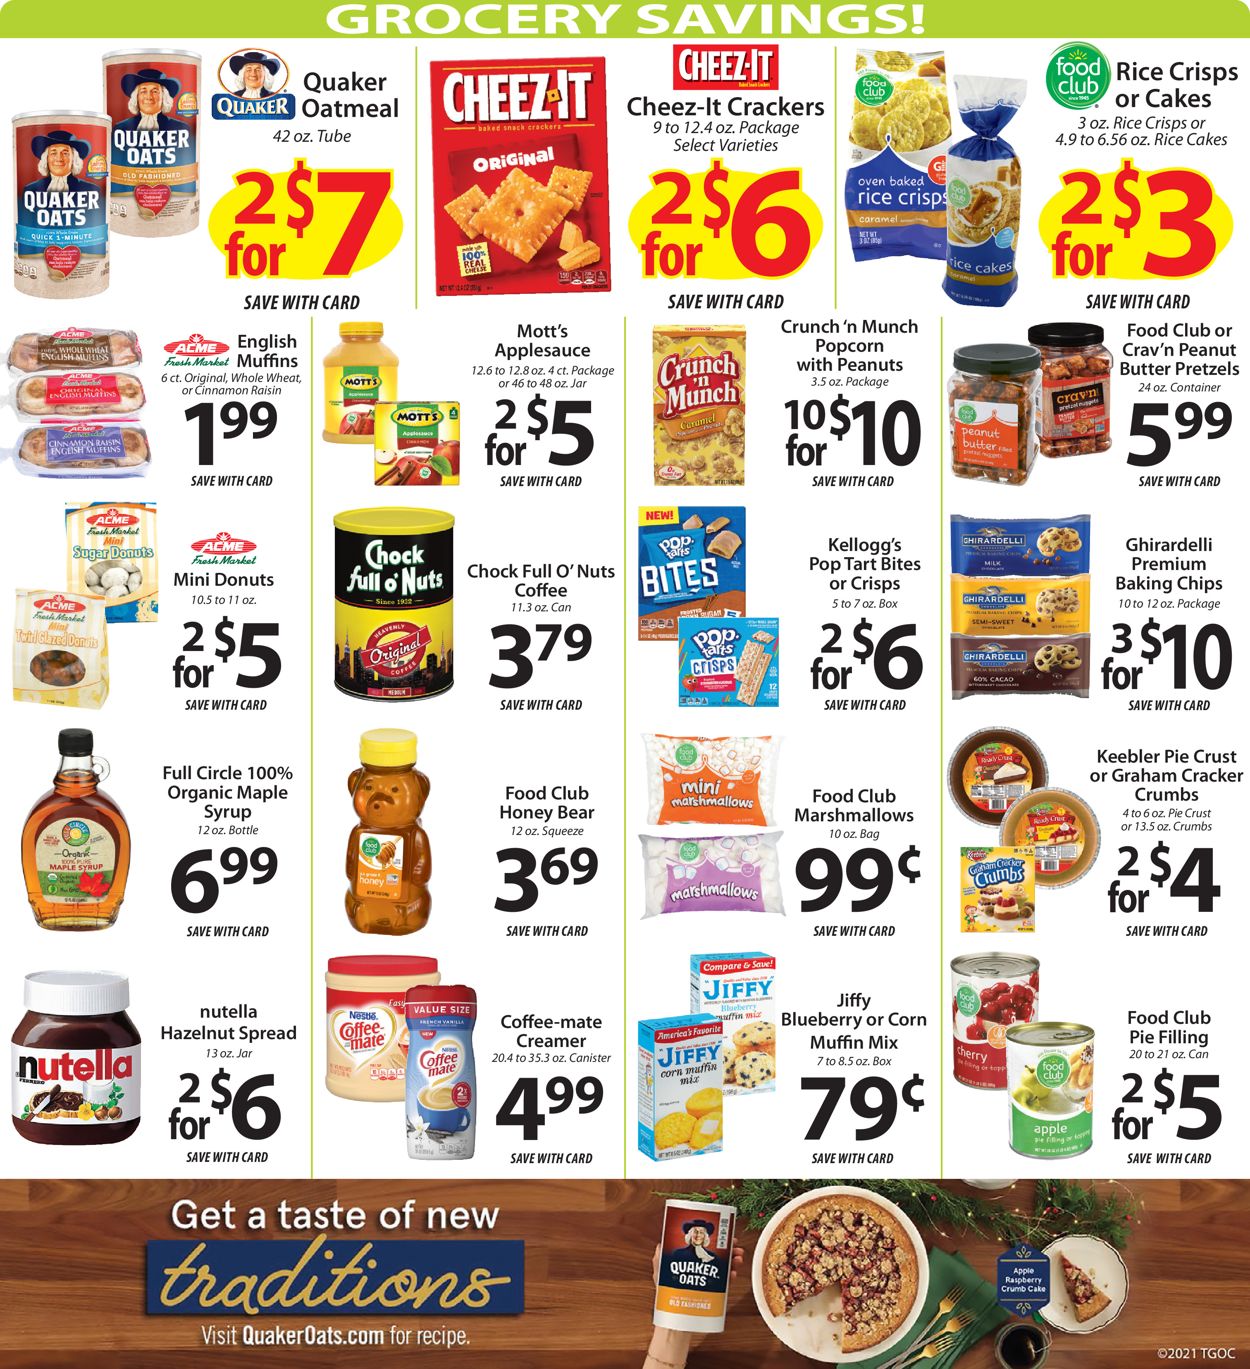 Acme Fresh Market HOLIDAY 2021 Current weekly ad 12/02 12/08/2021 [9